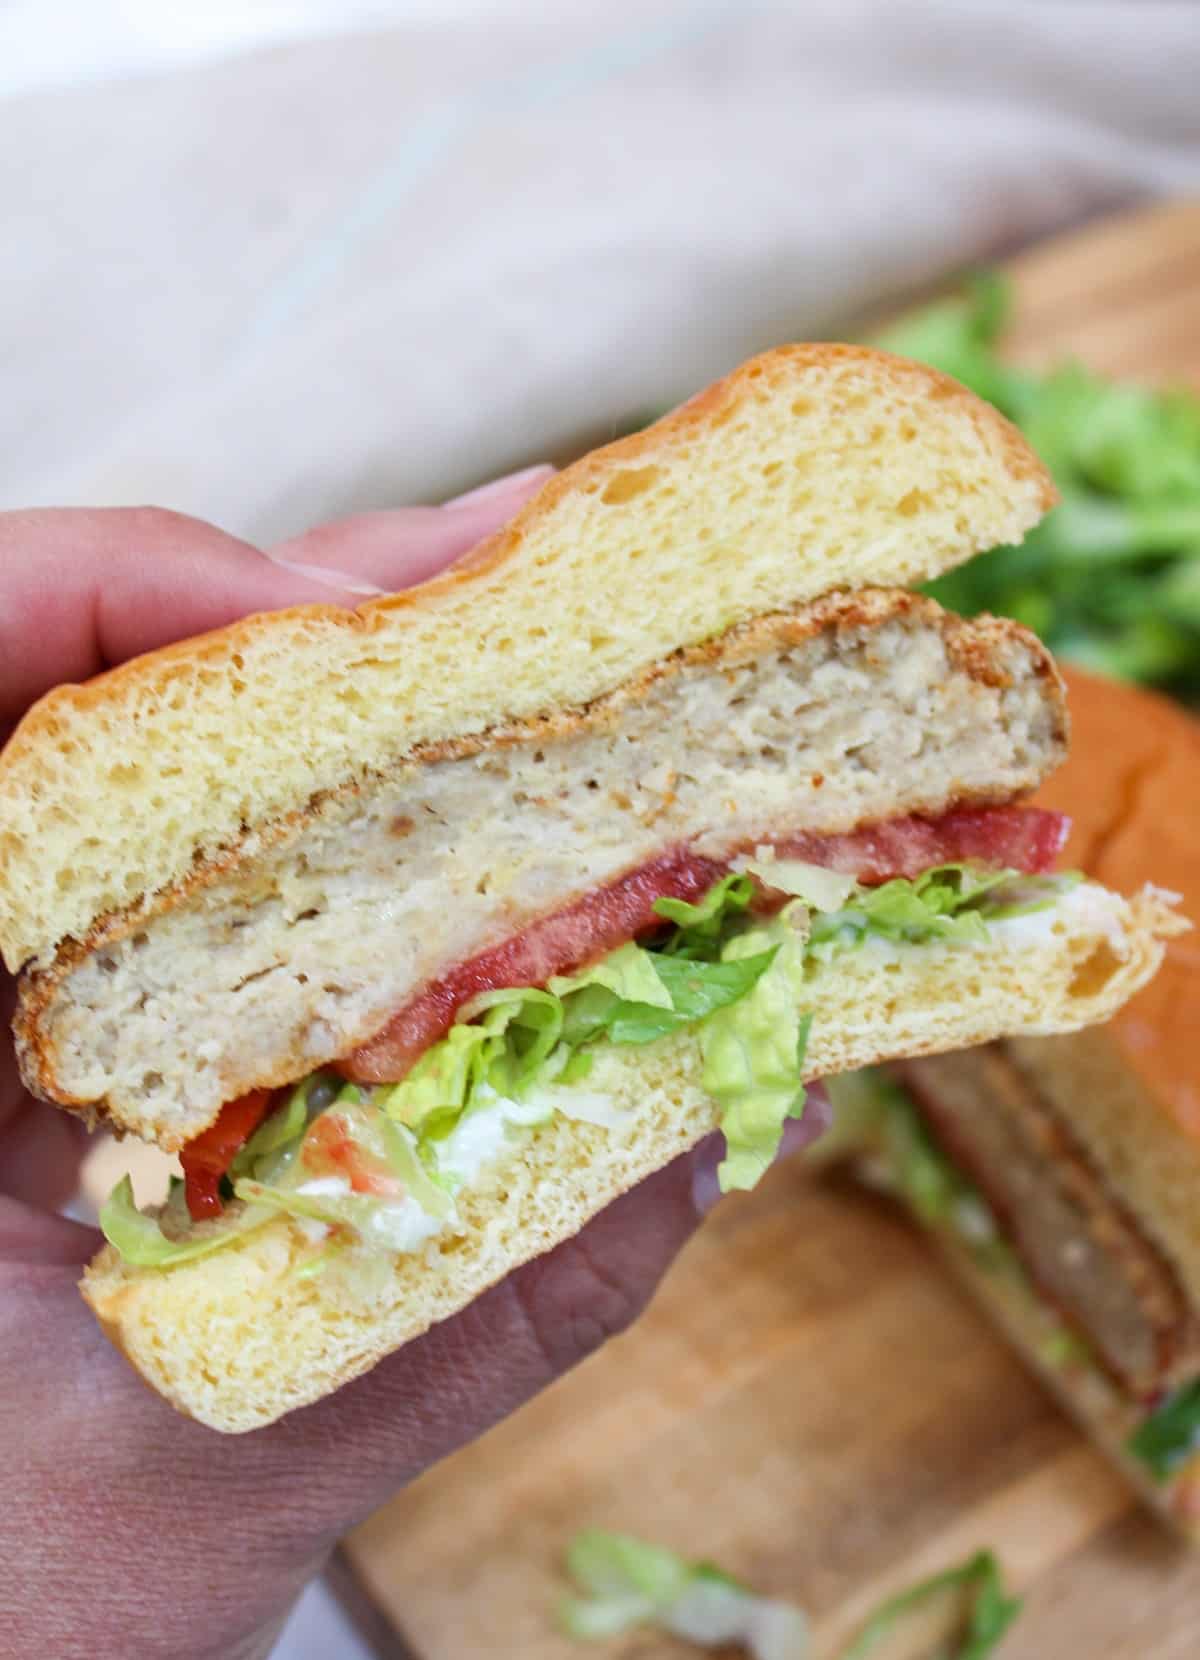 crispy chicken patty on a bun with shredded lettuce and sliced tomato. cut in half and held in hand.